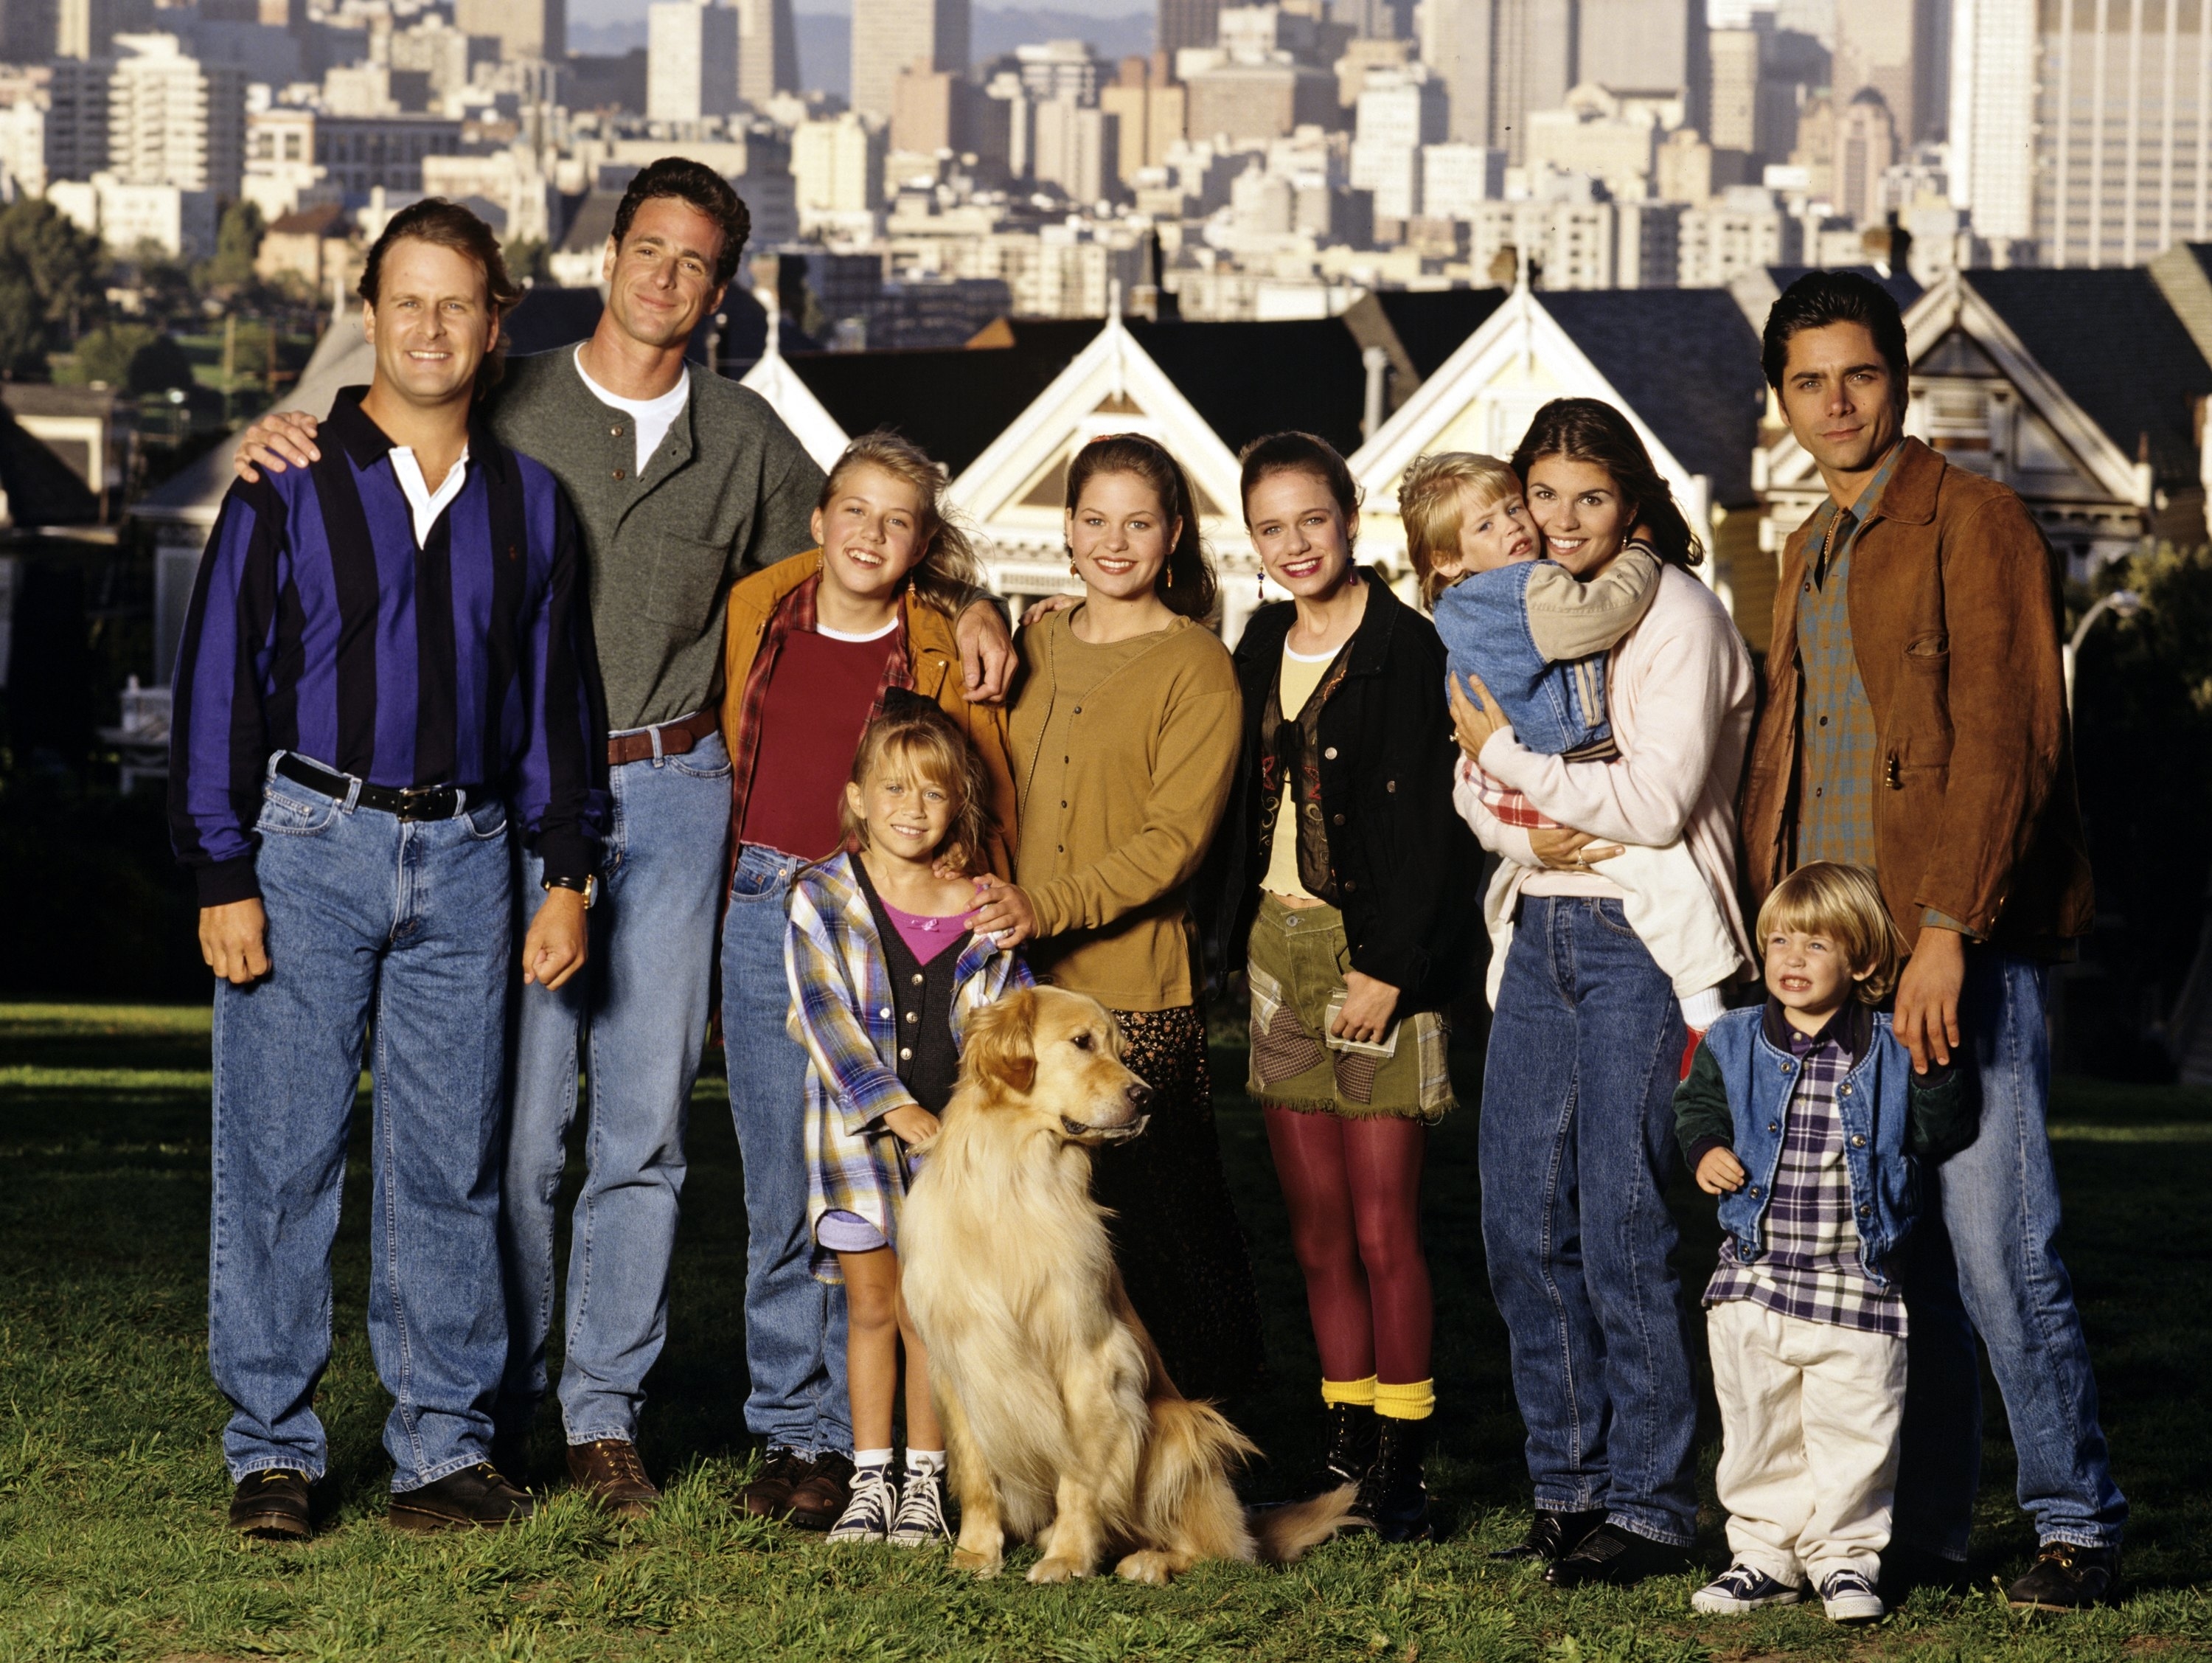 The image shows the cast of &quot;Full House&quot; posing outdoors with the San Francisco skyline in the background. Members include Bob Saget, Dave Coulier, John Stamos, and others